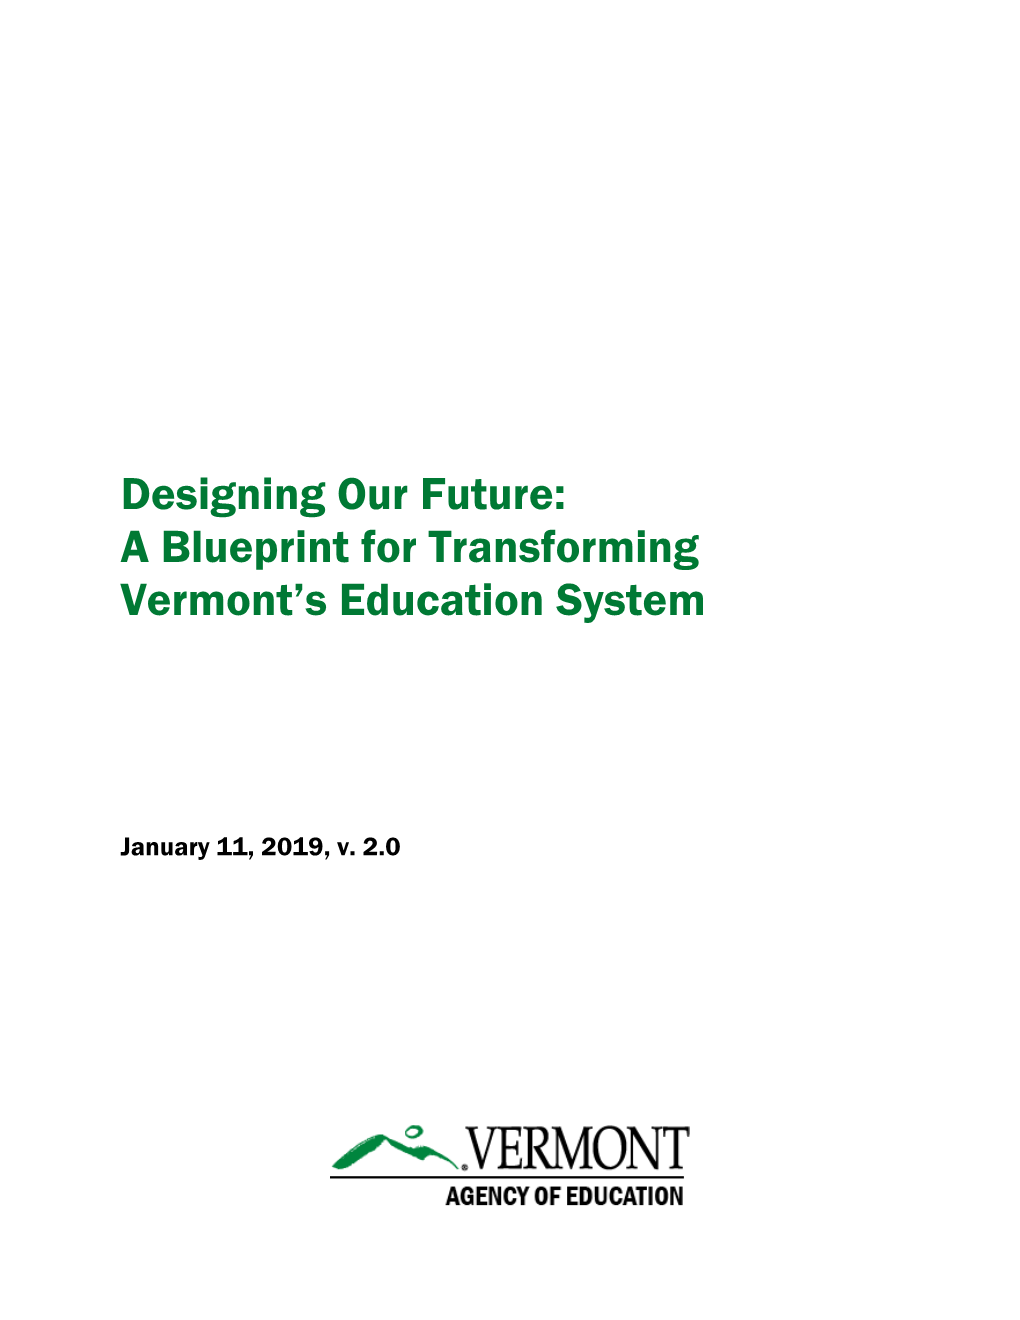 Designing Our Future: a Blueprint for Transforming Vermont's Education